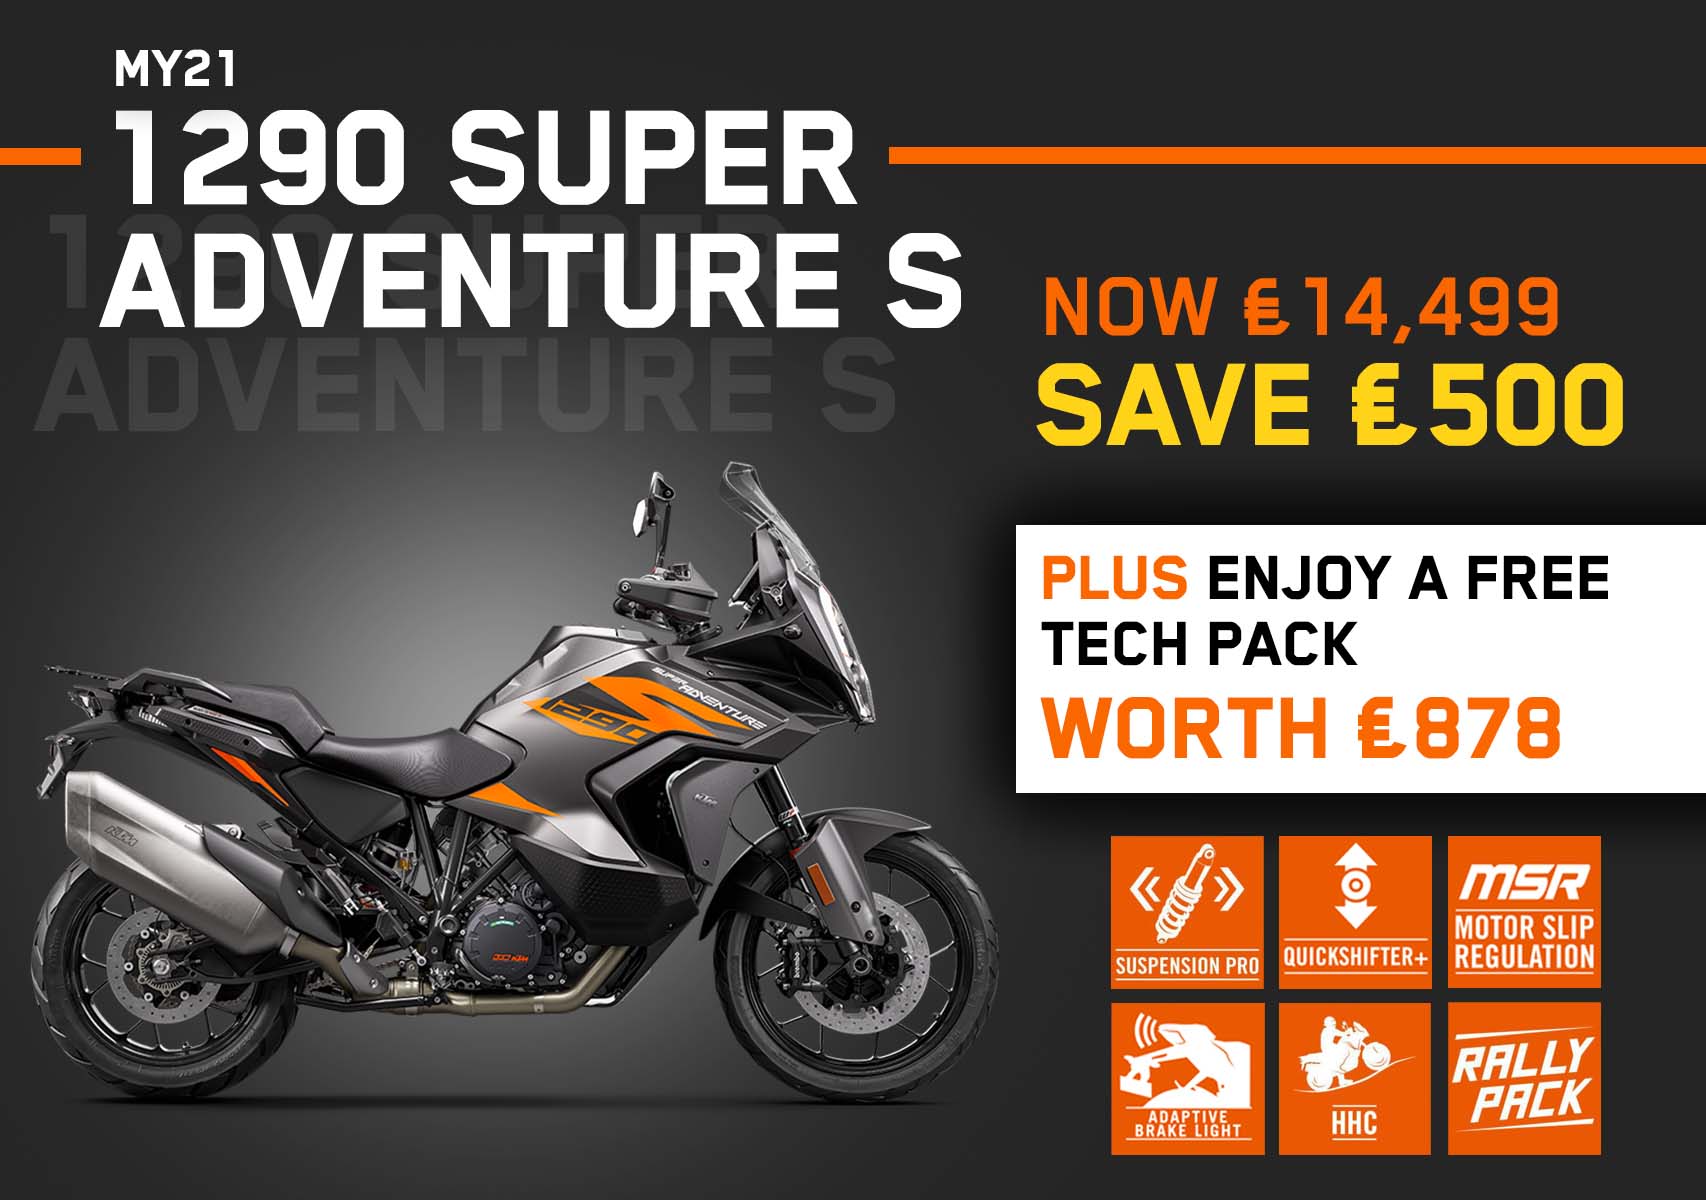 Exclusive Laguna offer now available on the KTM 1290 Super Adventure S